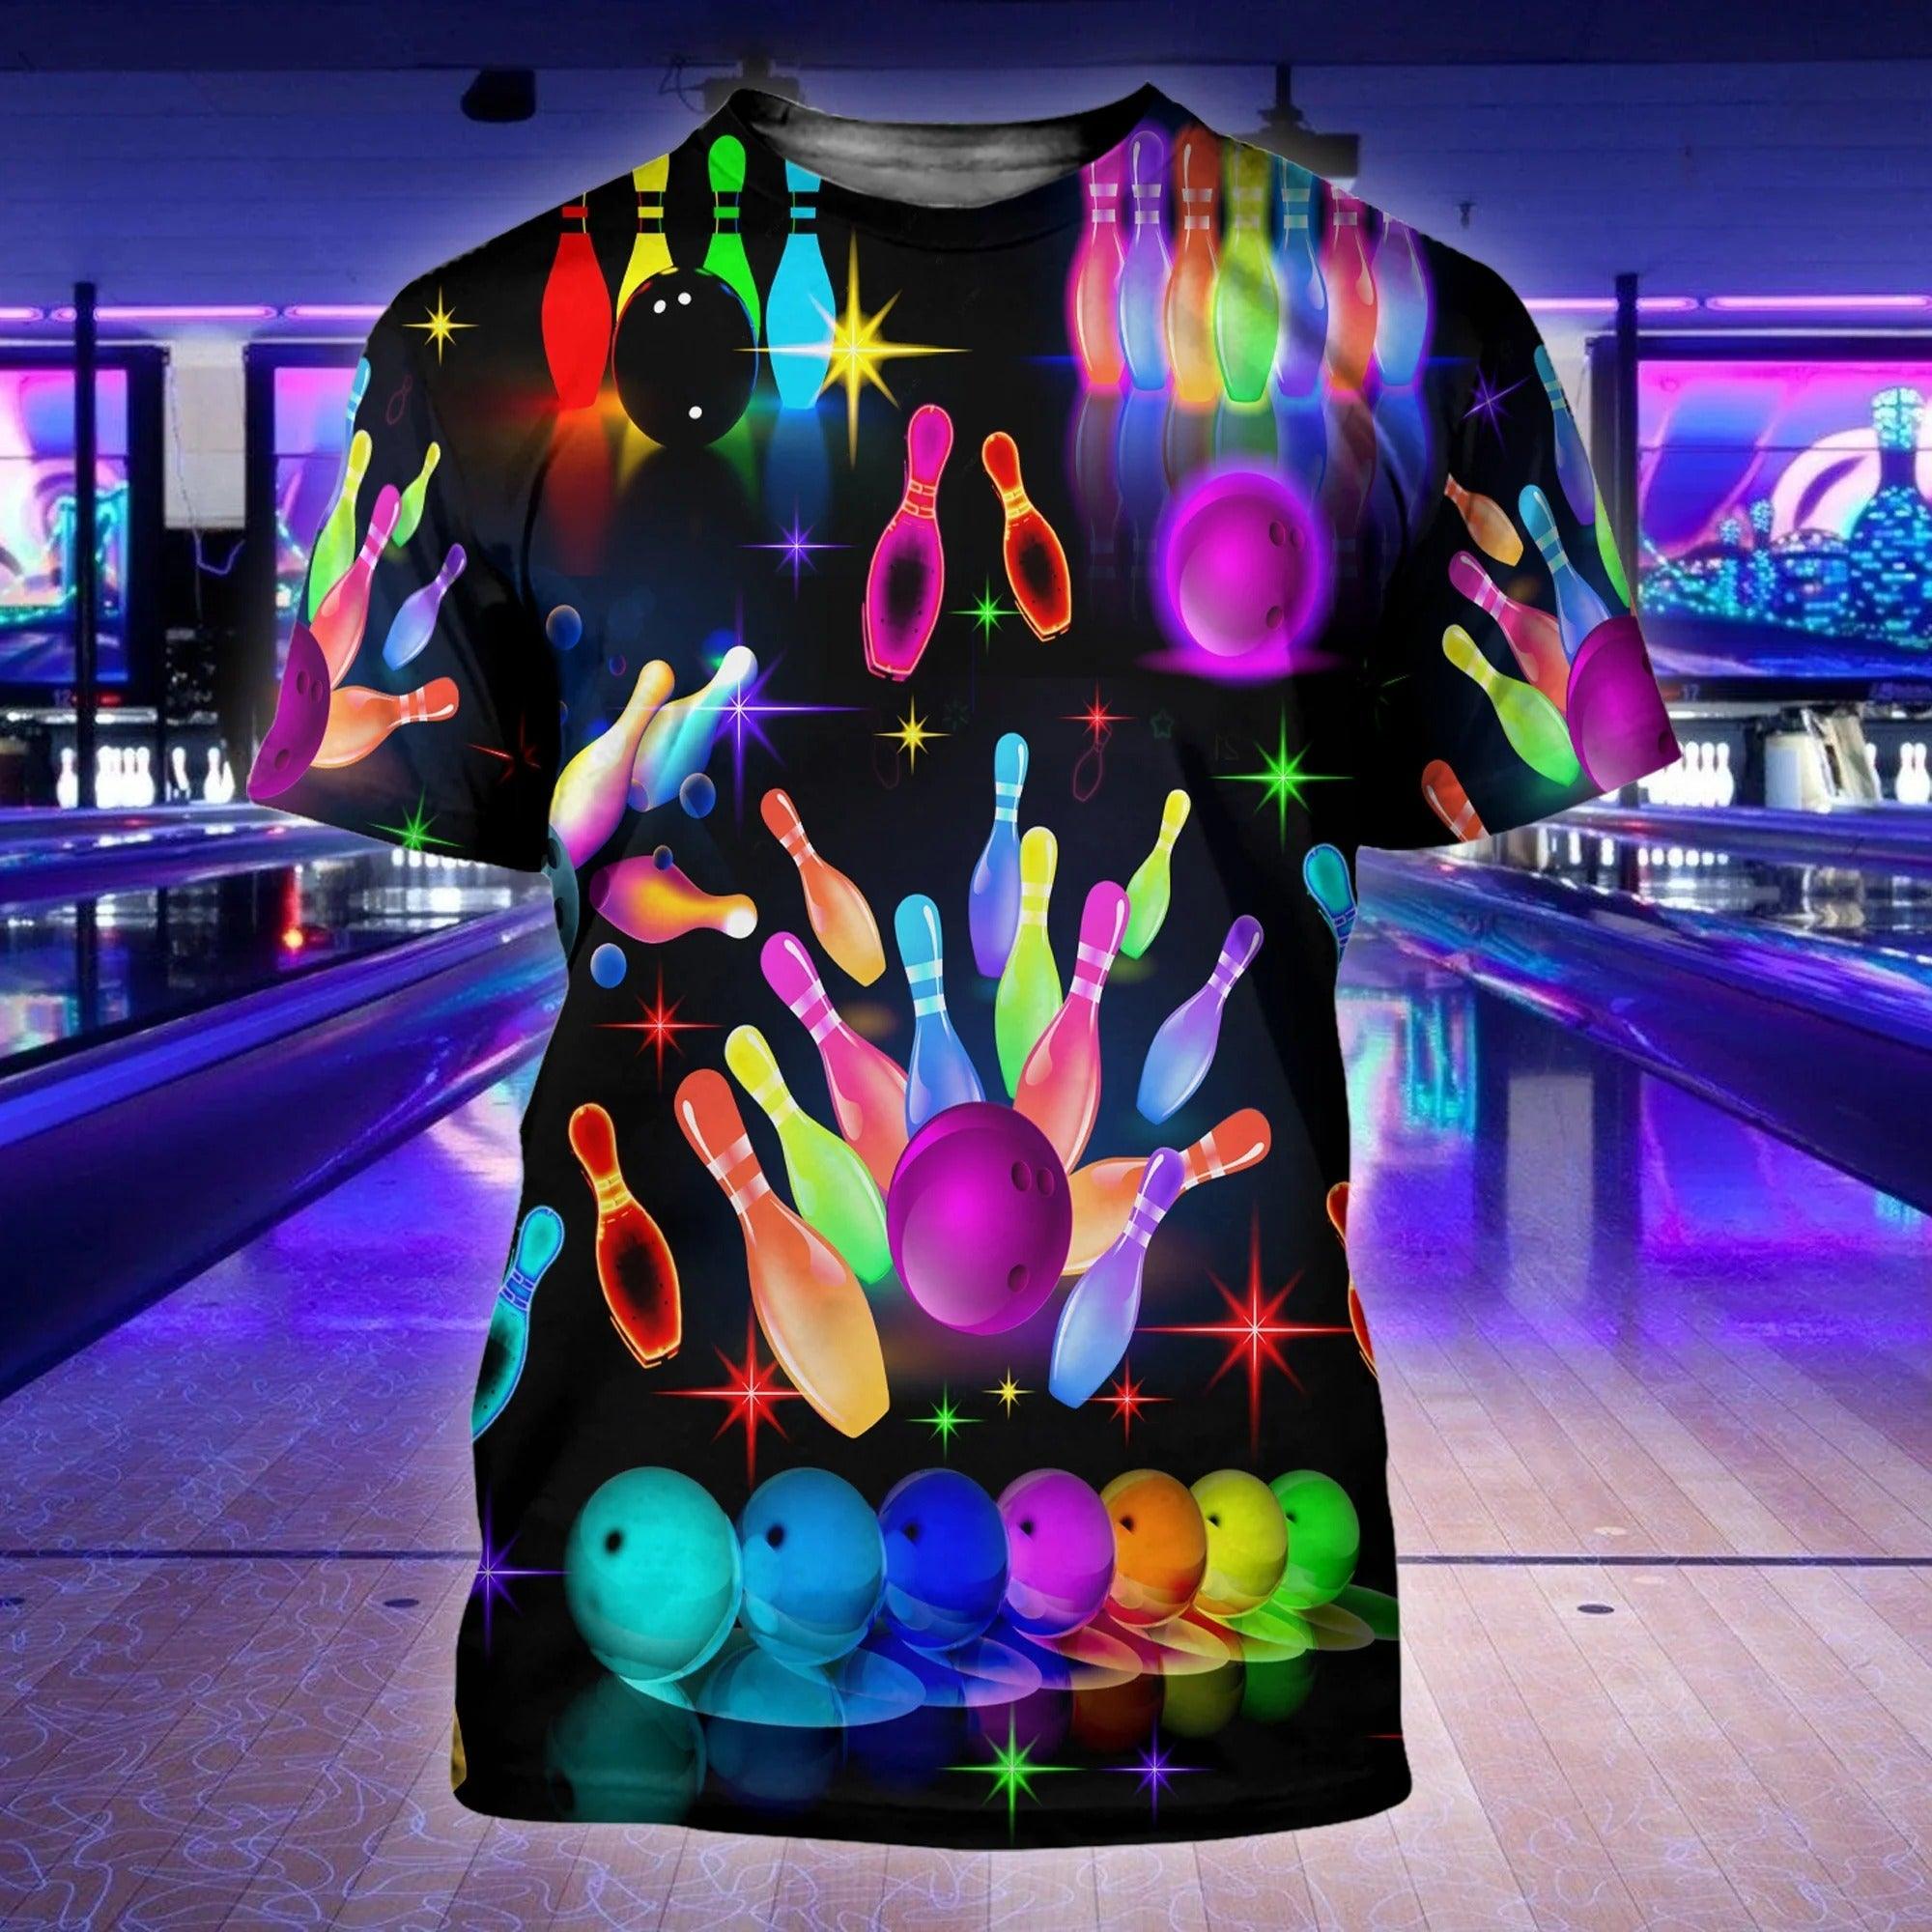 Bowling T Shirt, Bowling Rainbow Colorful Shirt For Men And Women, Bowling Team Players Uniform - Perfect Gift For Bowling Lovers, Bowlers - Amzanimalsgift